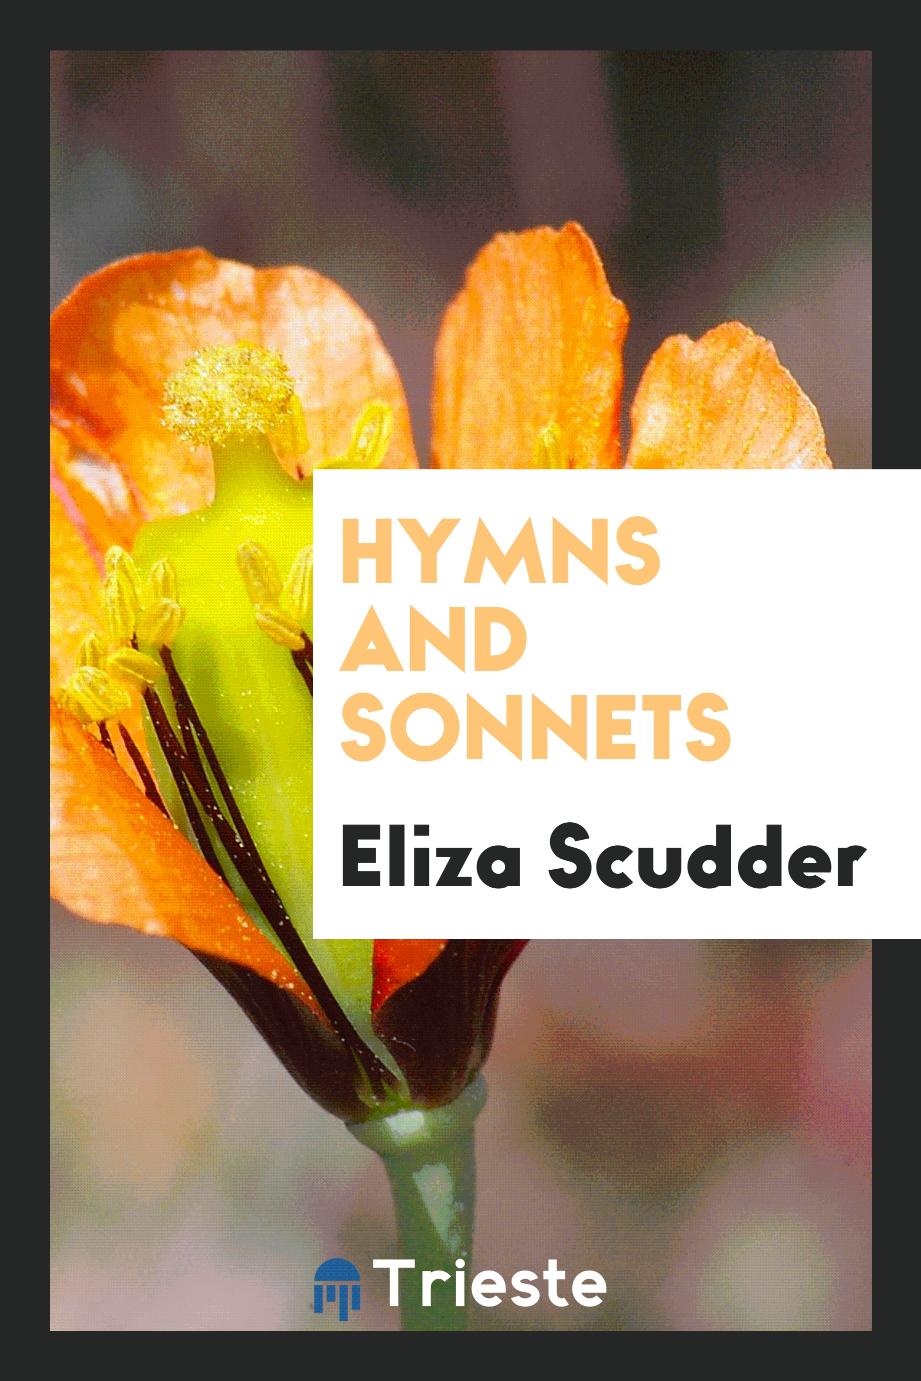 Hymns and Sonnets